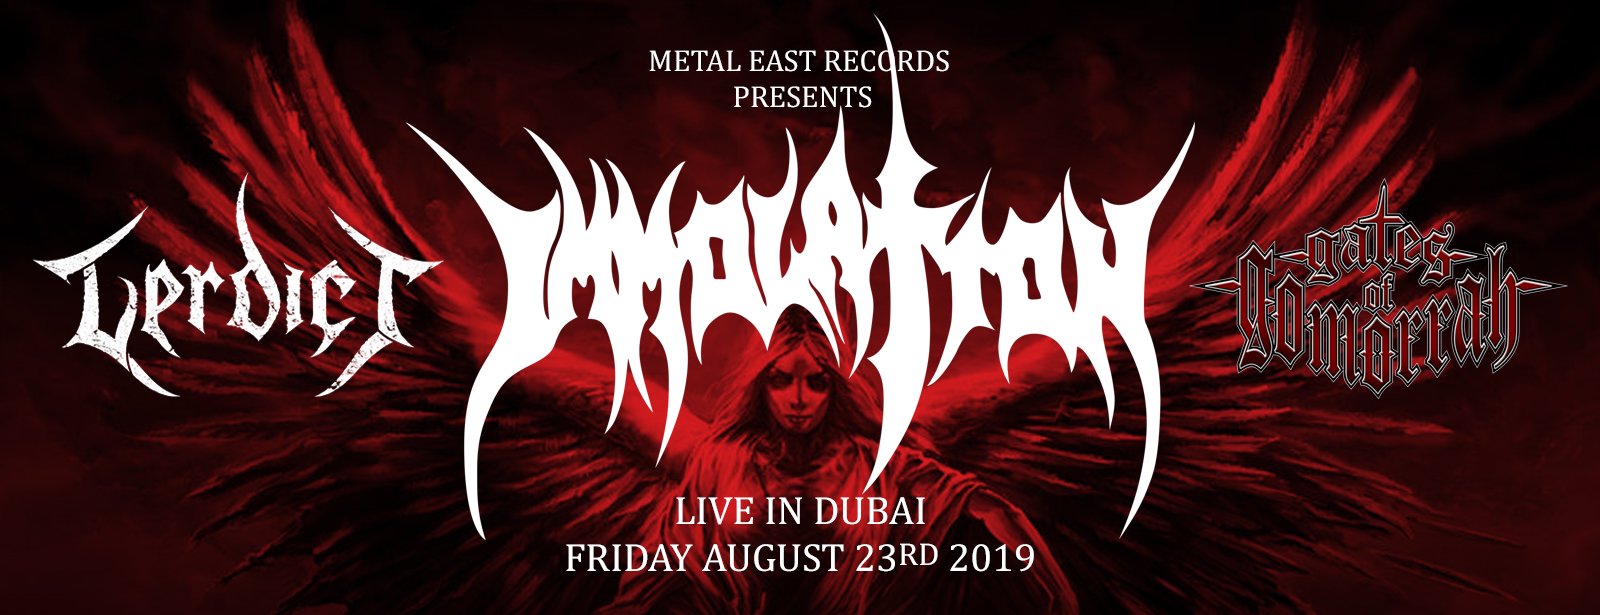 Immolation Live Concert - Coming Soon in UAE